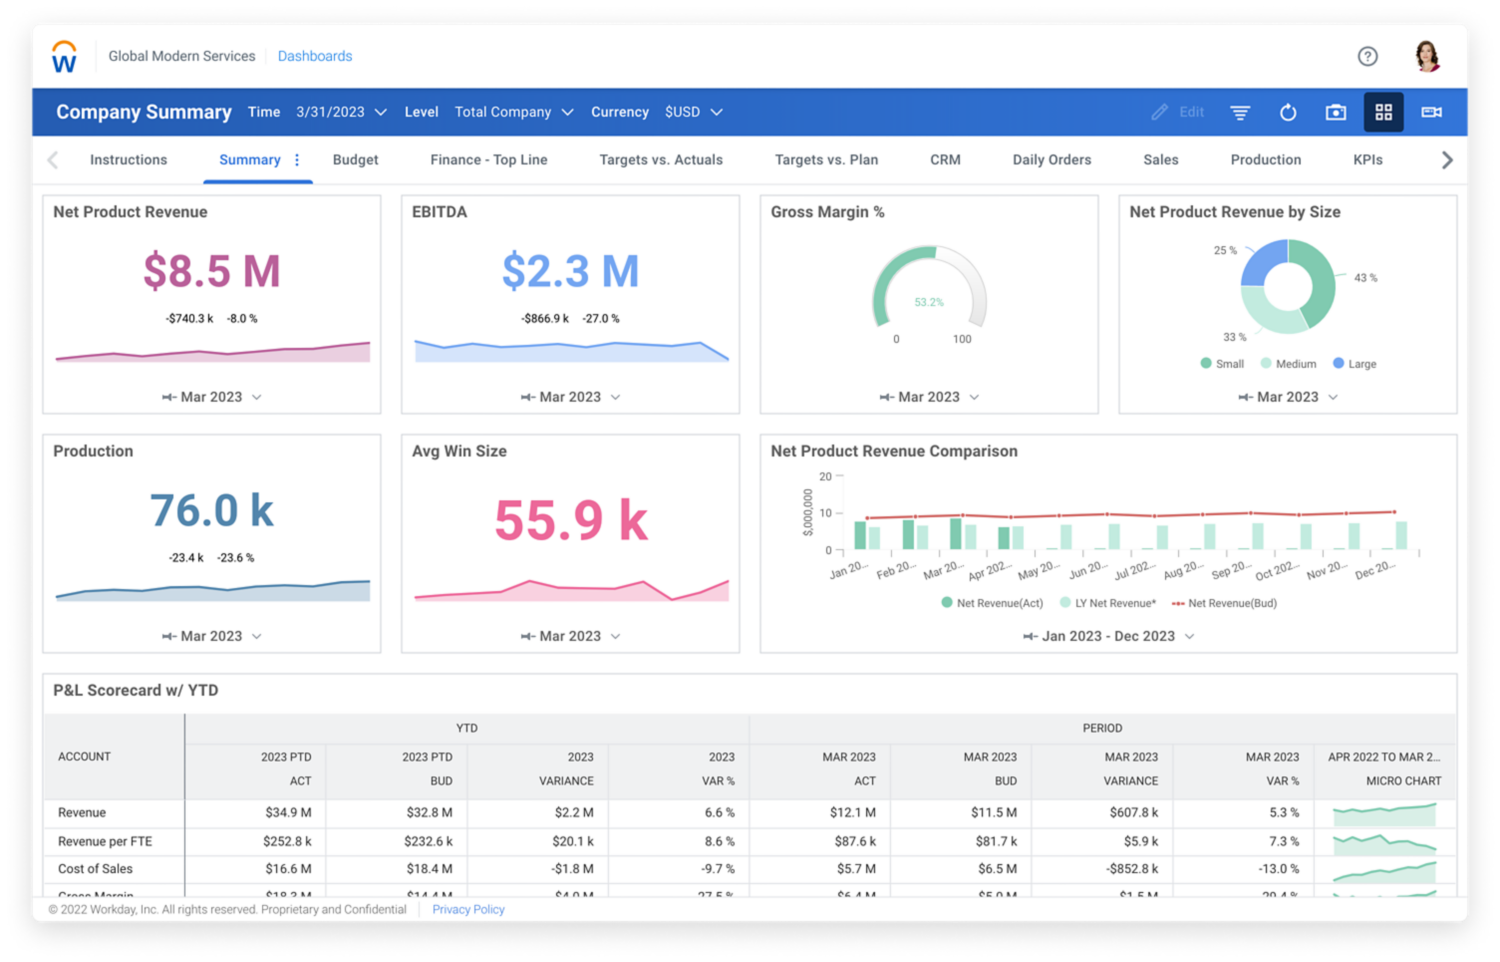 Workday Adaptive Planning’s financial analytics dashboard showing bar graphs and numerical values for Top Line finance including Net Product Revenue, Gross Margin percent